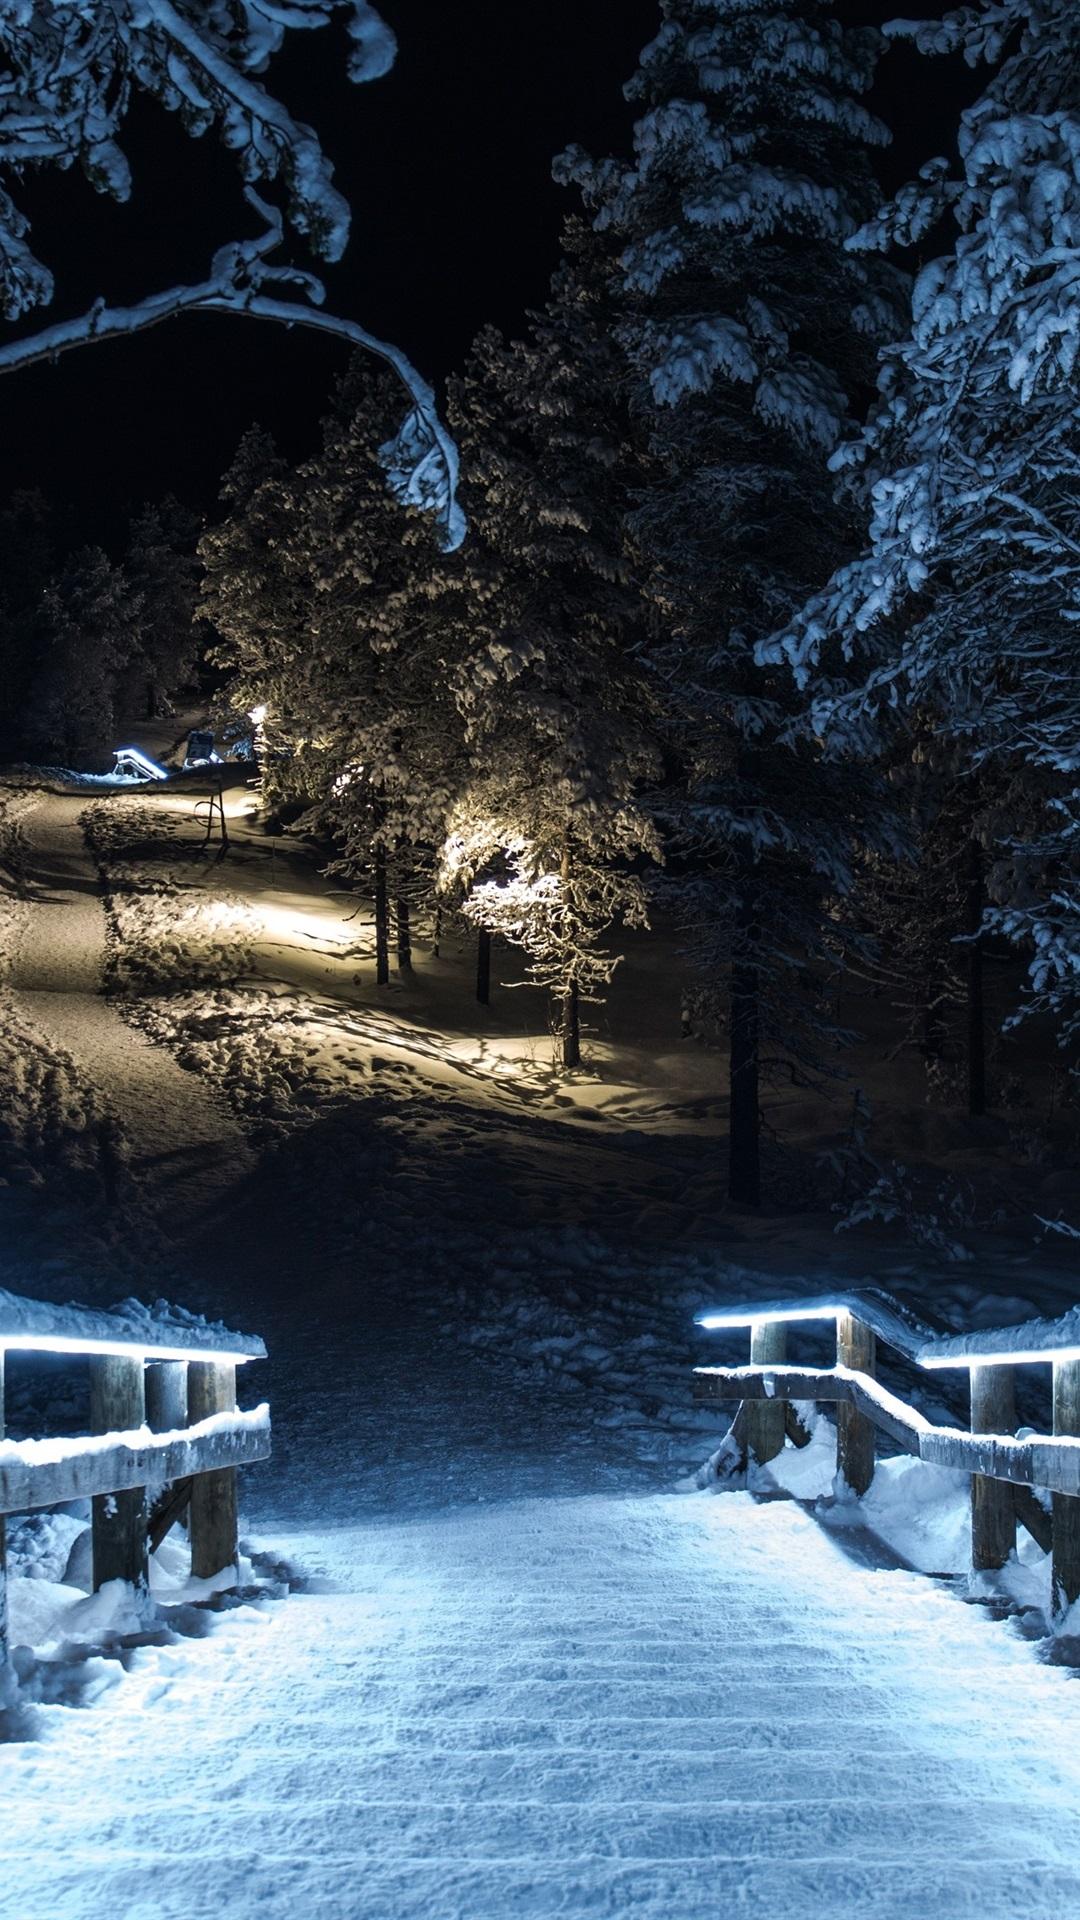 Winter park at night, snow, trees, wood stairs, lights